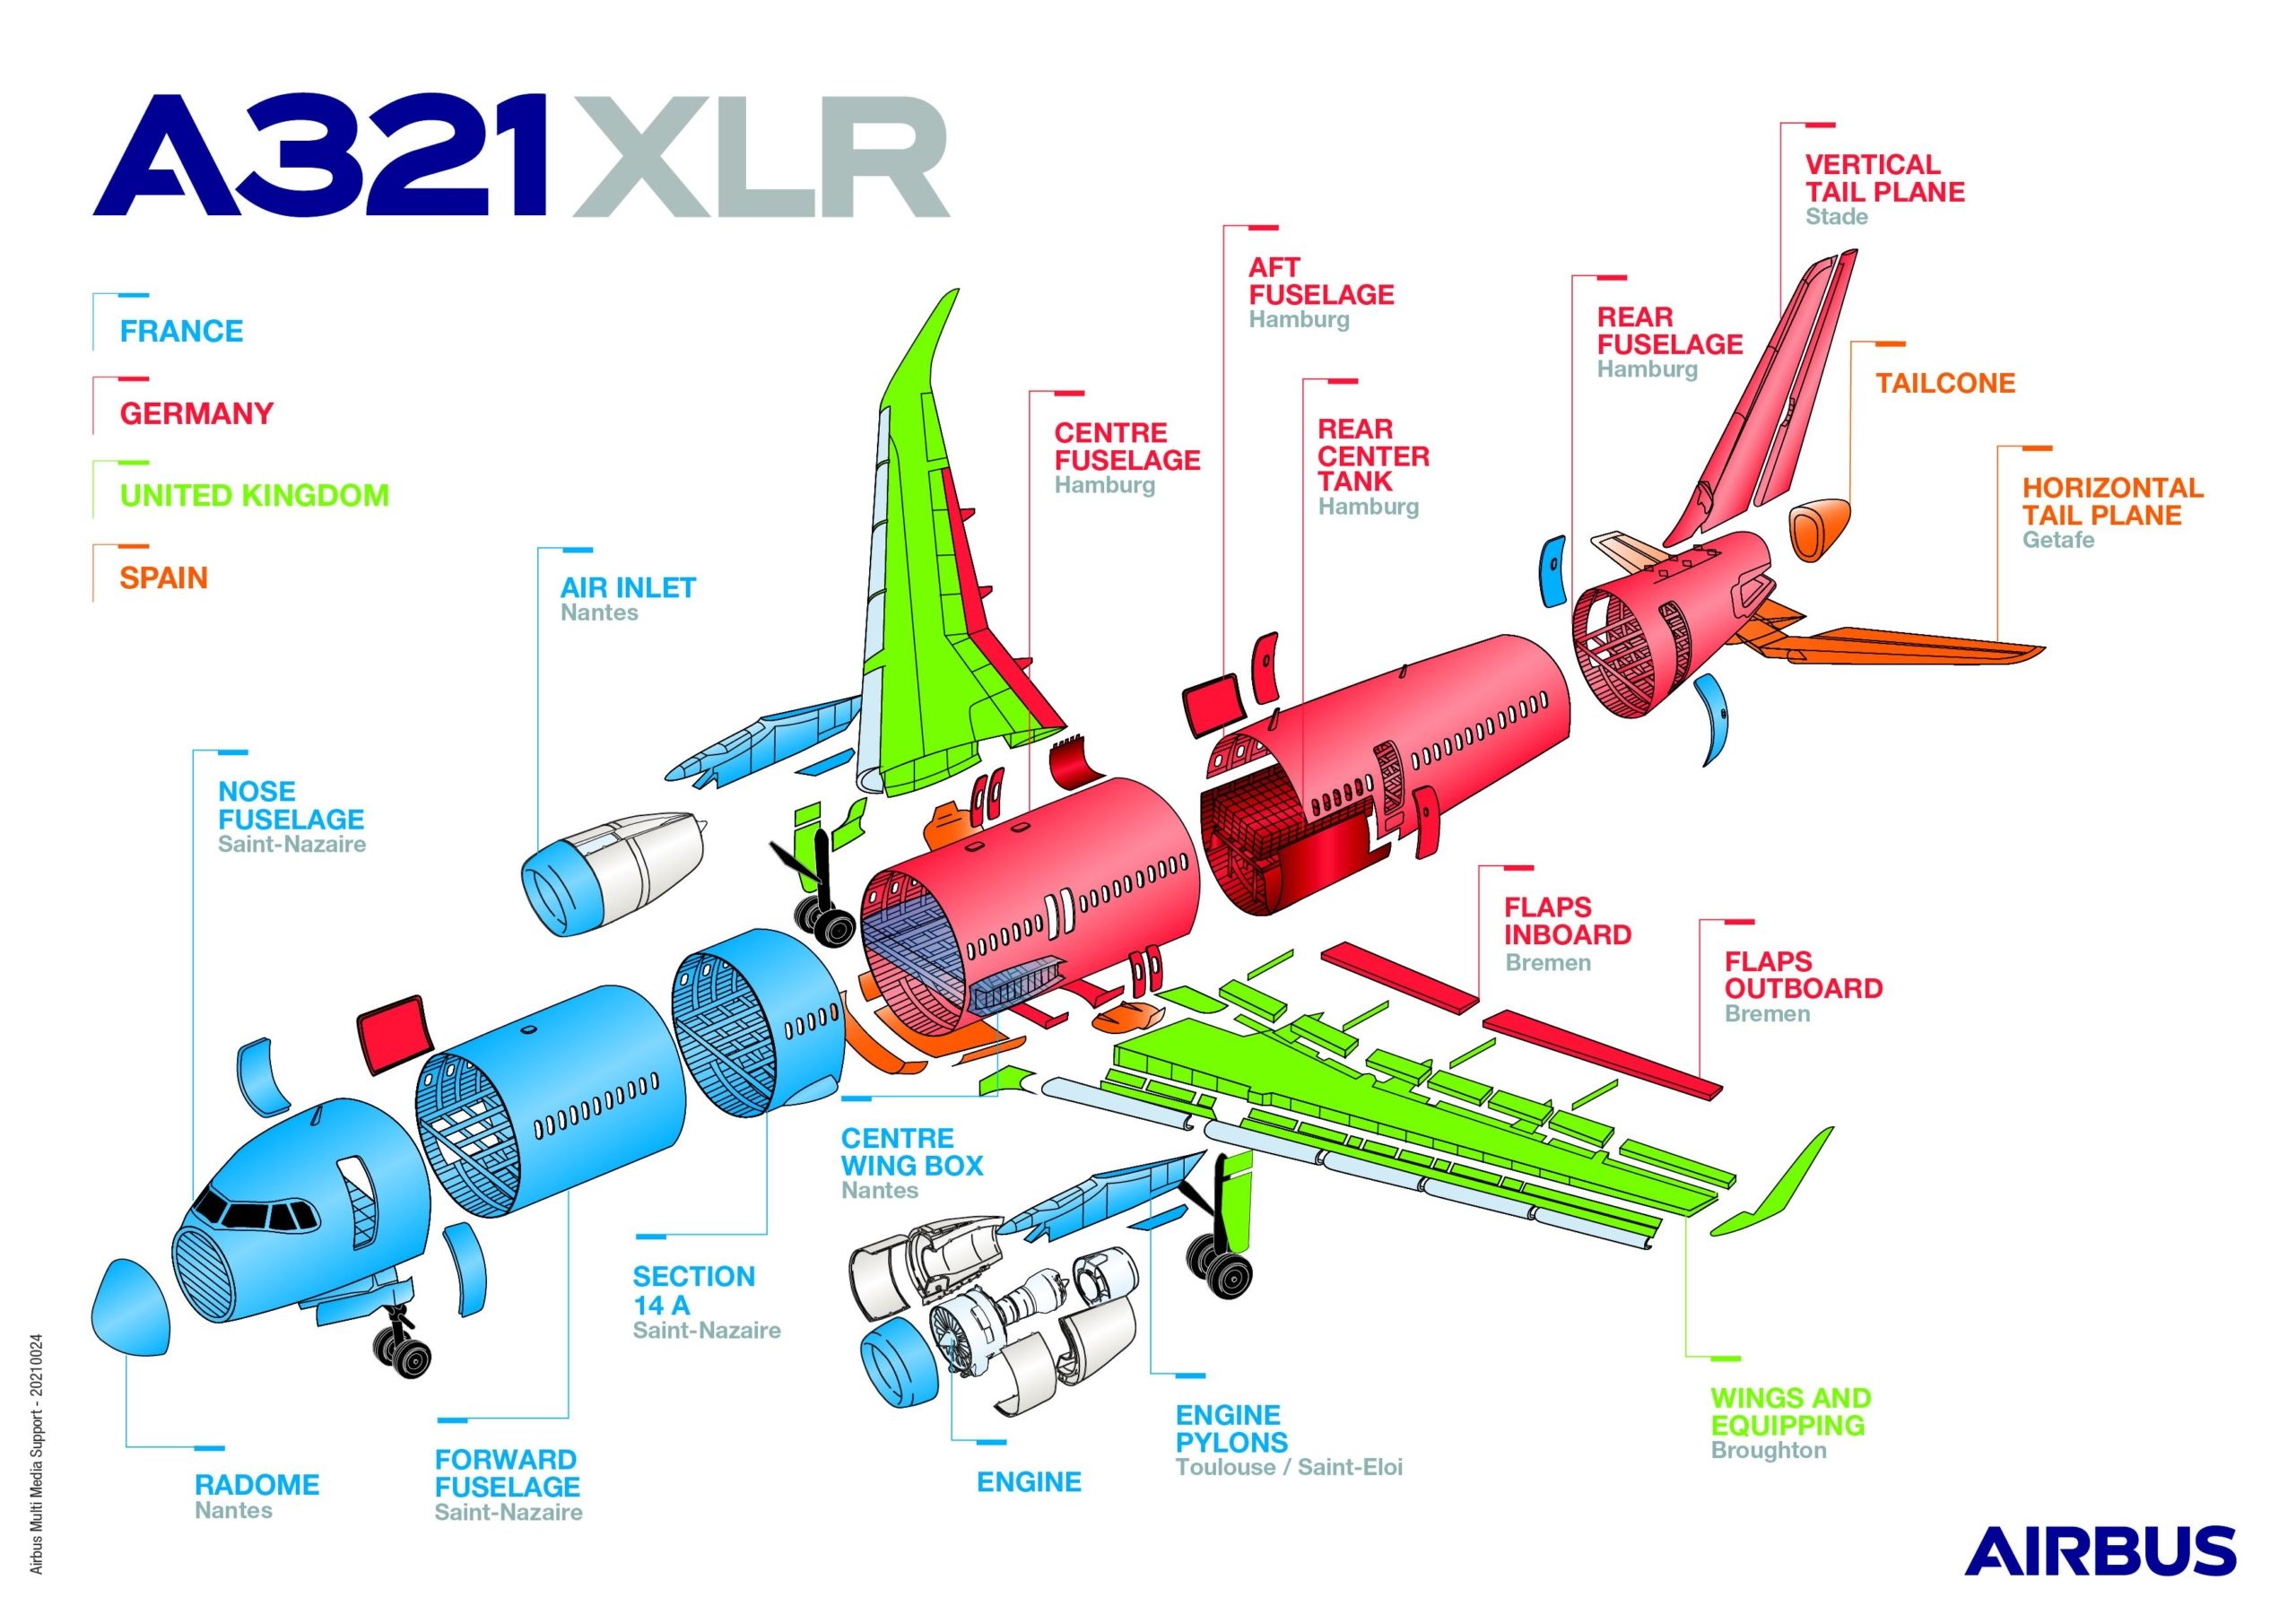 Where Are Parts Made For The Airbus A321xlr?